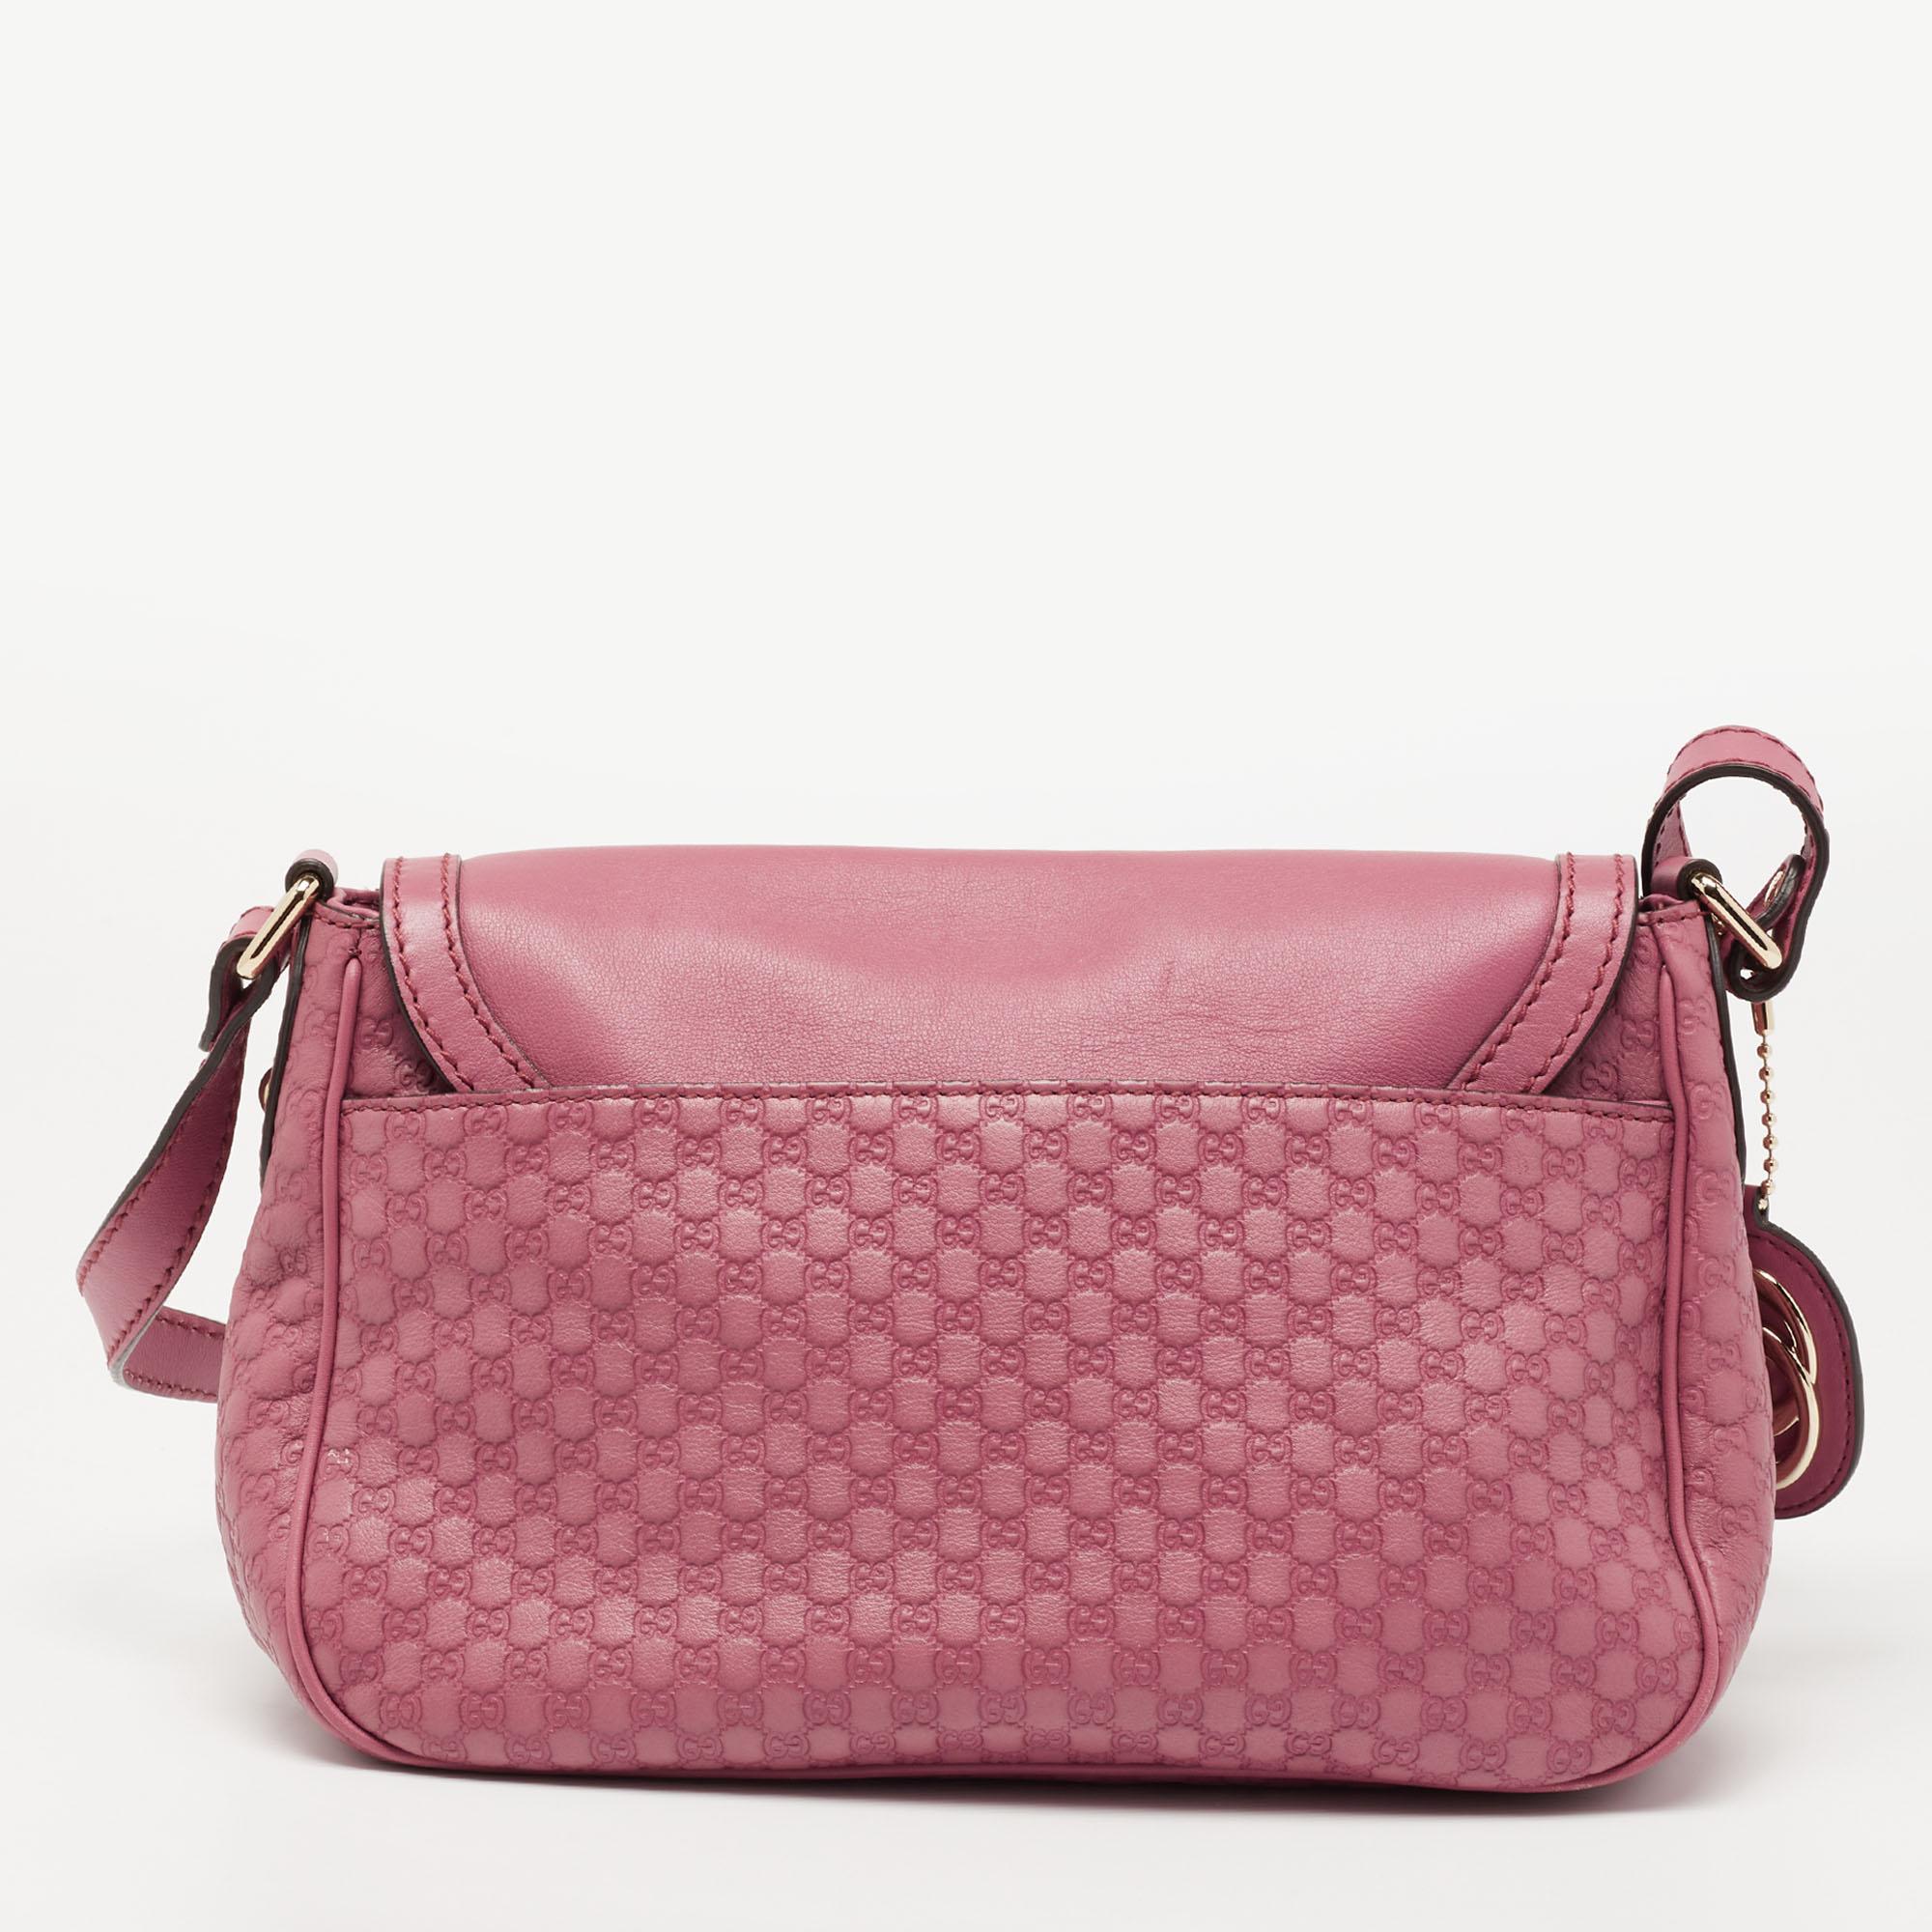 With a Gucci bag by your side, it's going to be a stylish OOTD no matter the day. Here, we have this Gucci leather shoulder bag just for you. Its compact shape, minimal details, and simple elegance make it a worthy purchase and a versatile